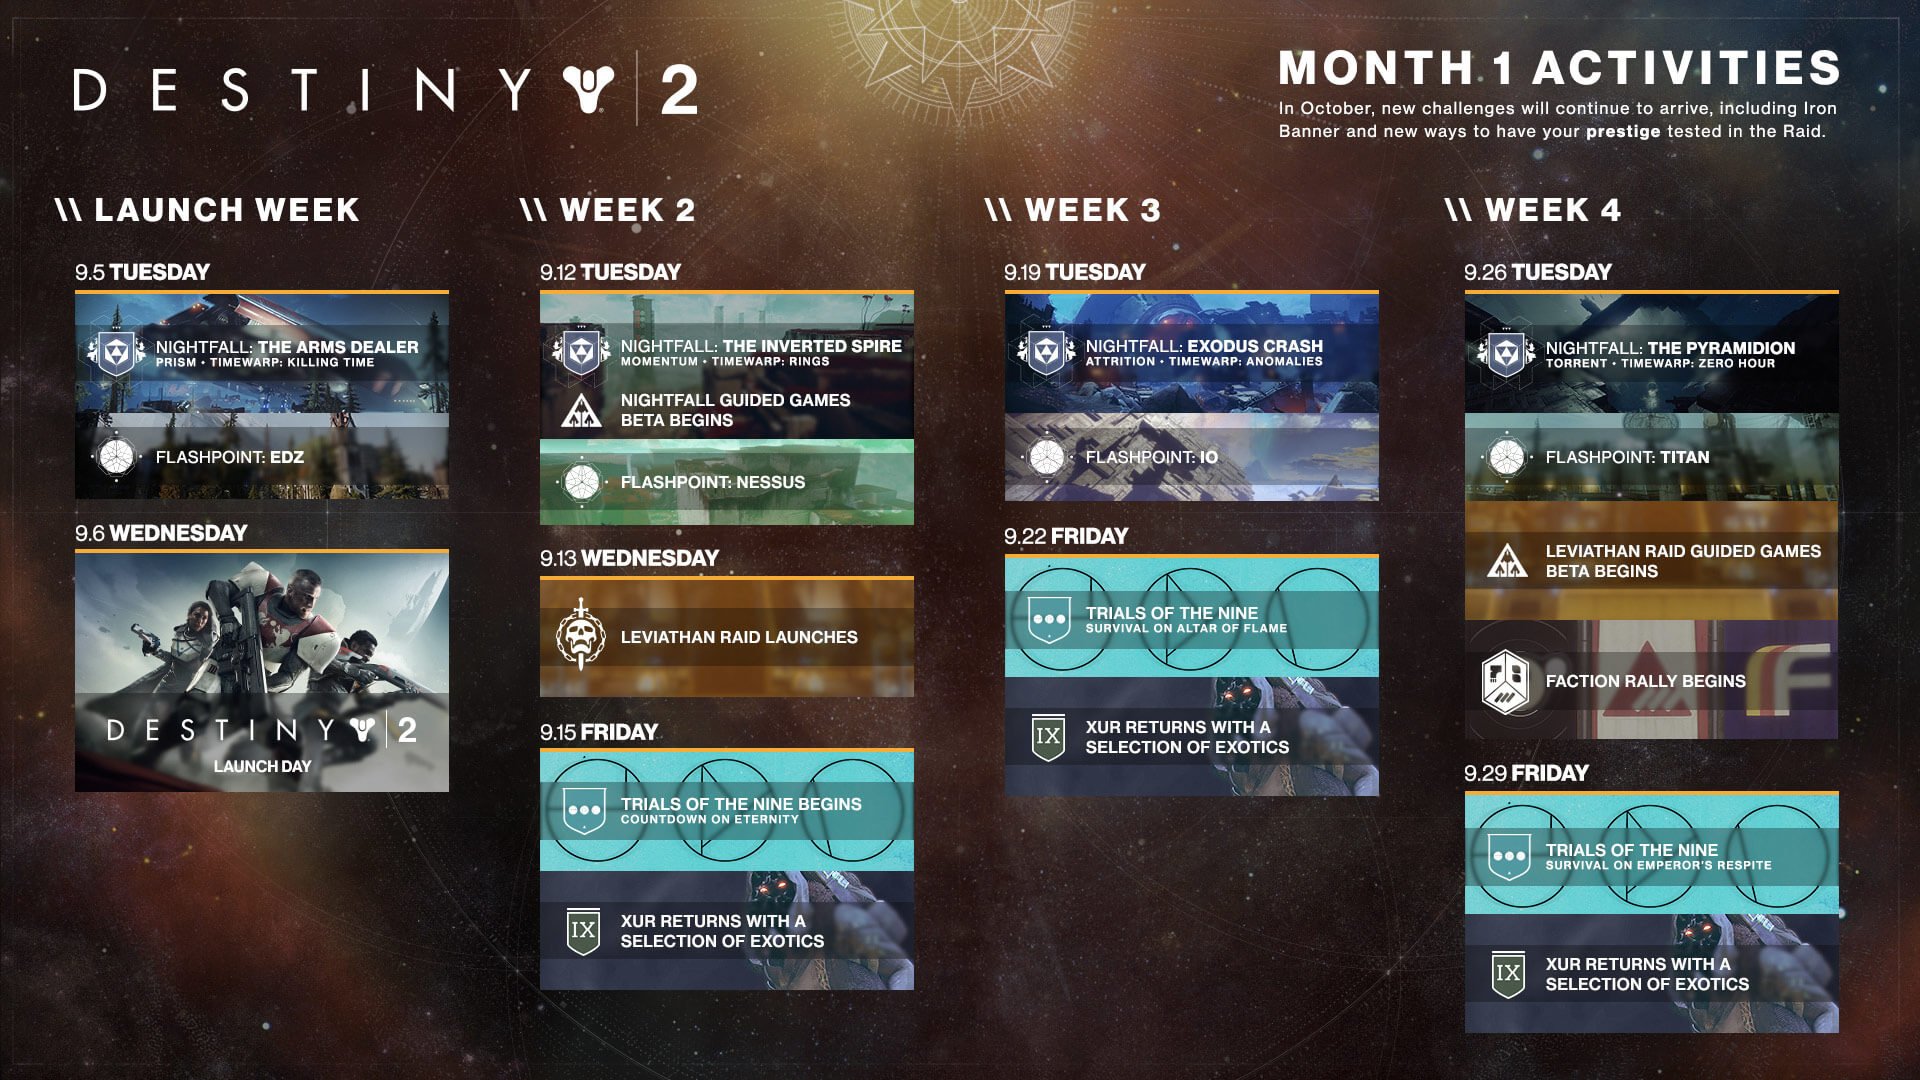 The Full List of First Month Activities Taking Place in Destiny 2